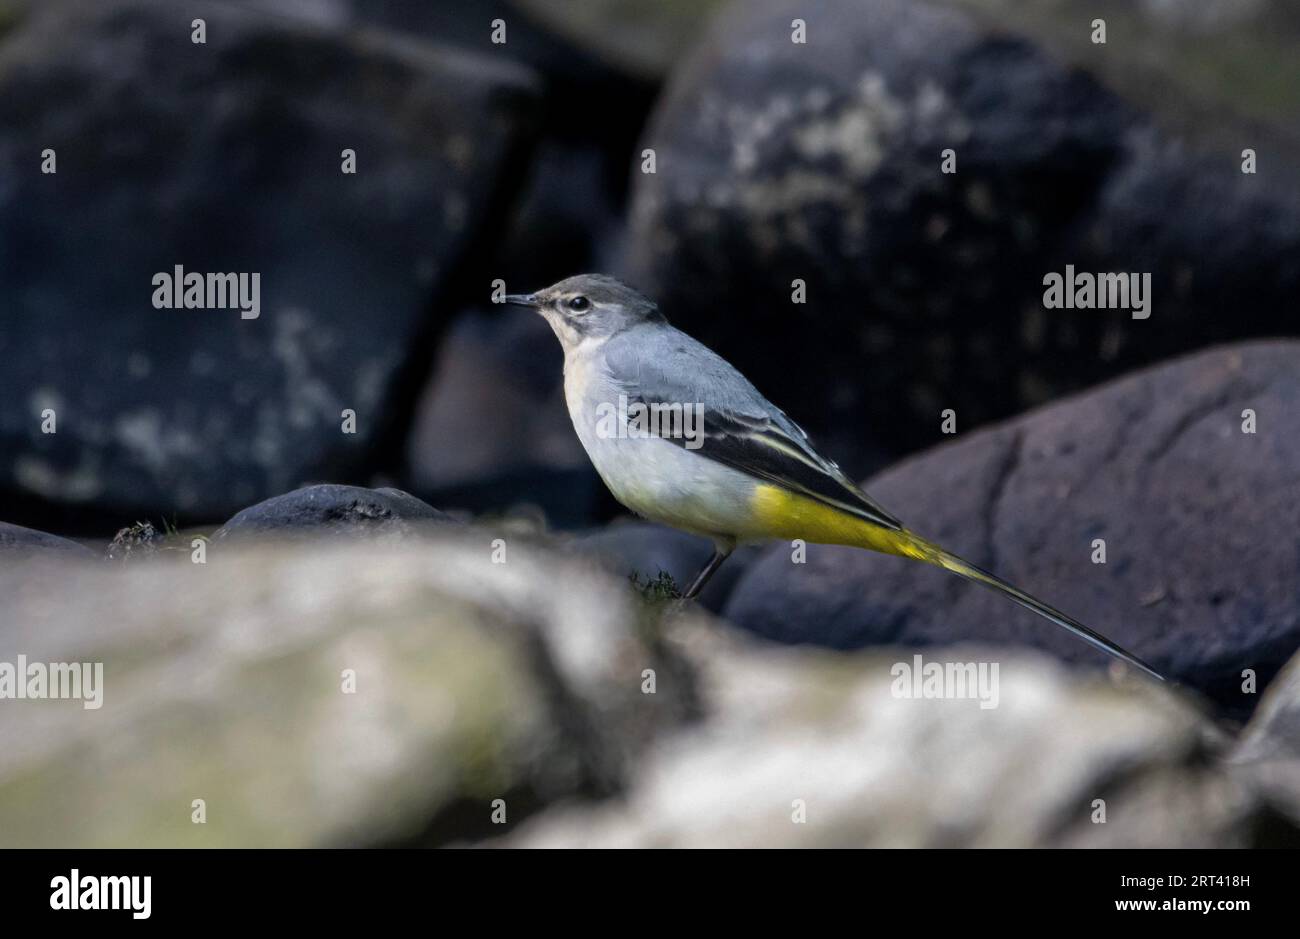 A Grey wagtail perched on a rocky outcrop, its head cocked to one side as it surveys the surroundings Stock Photo